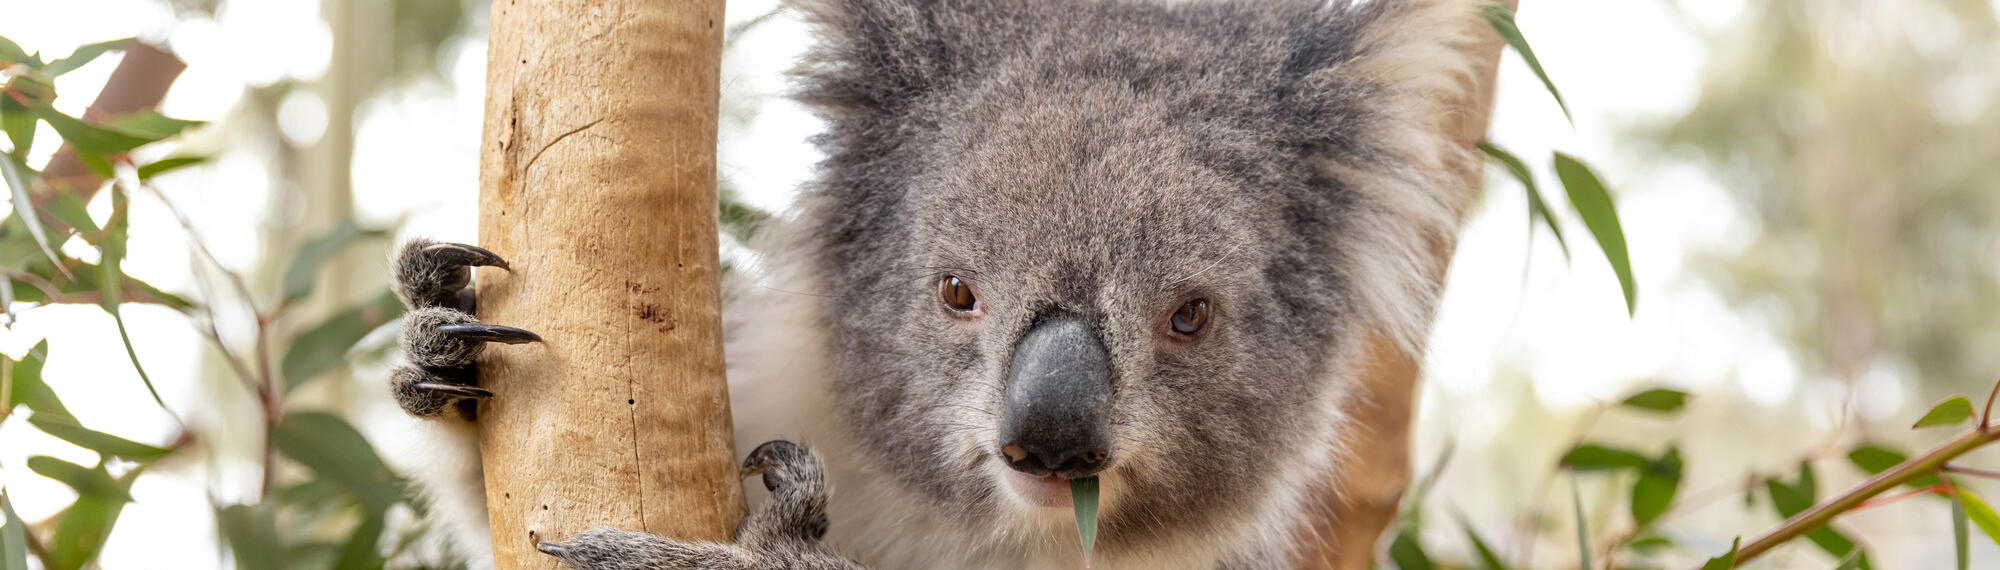 A koala with its claws around a tree branch with a eucalyptus leaf in its mouth